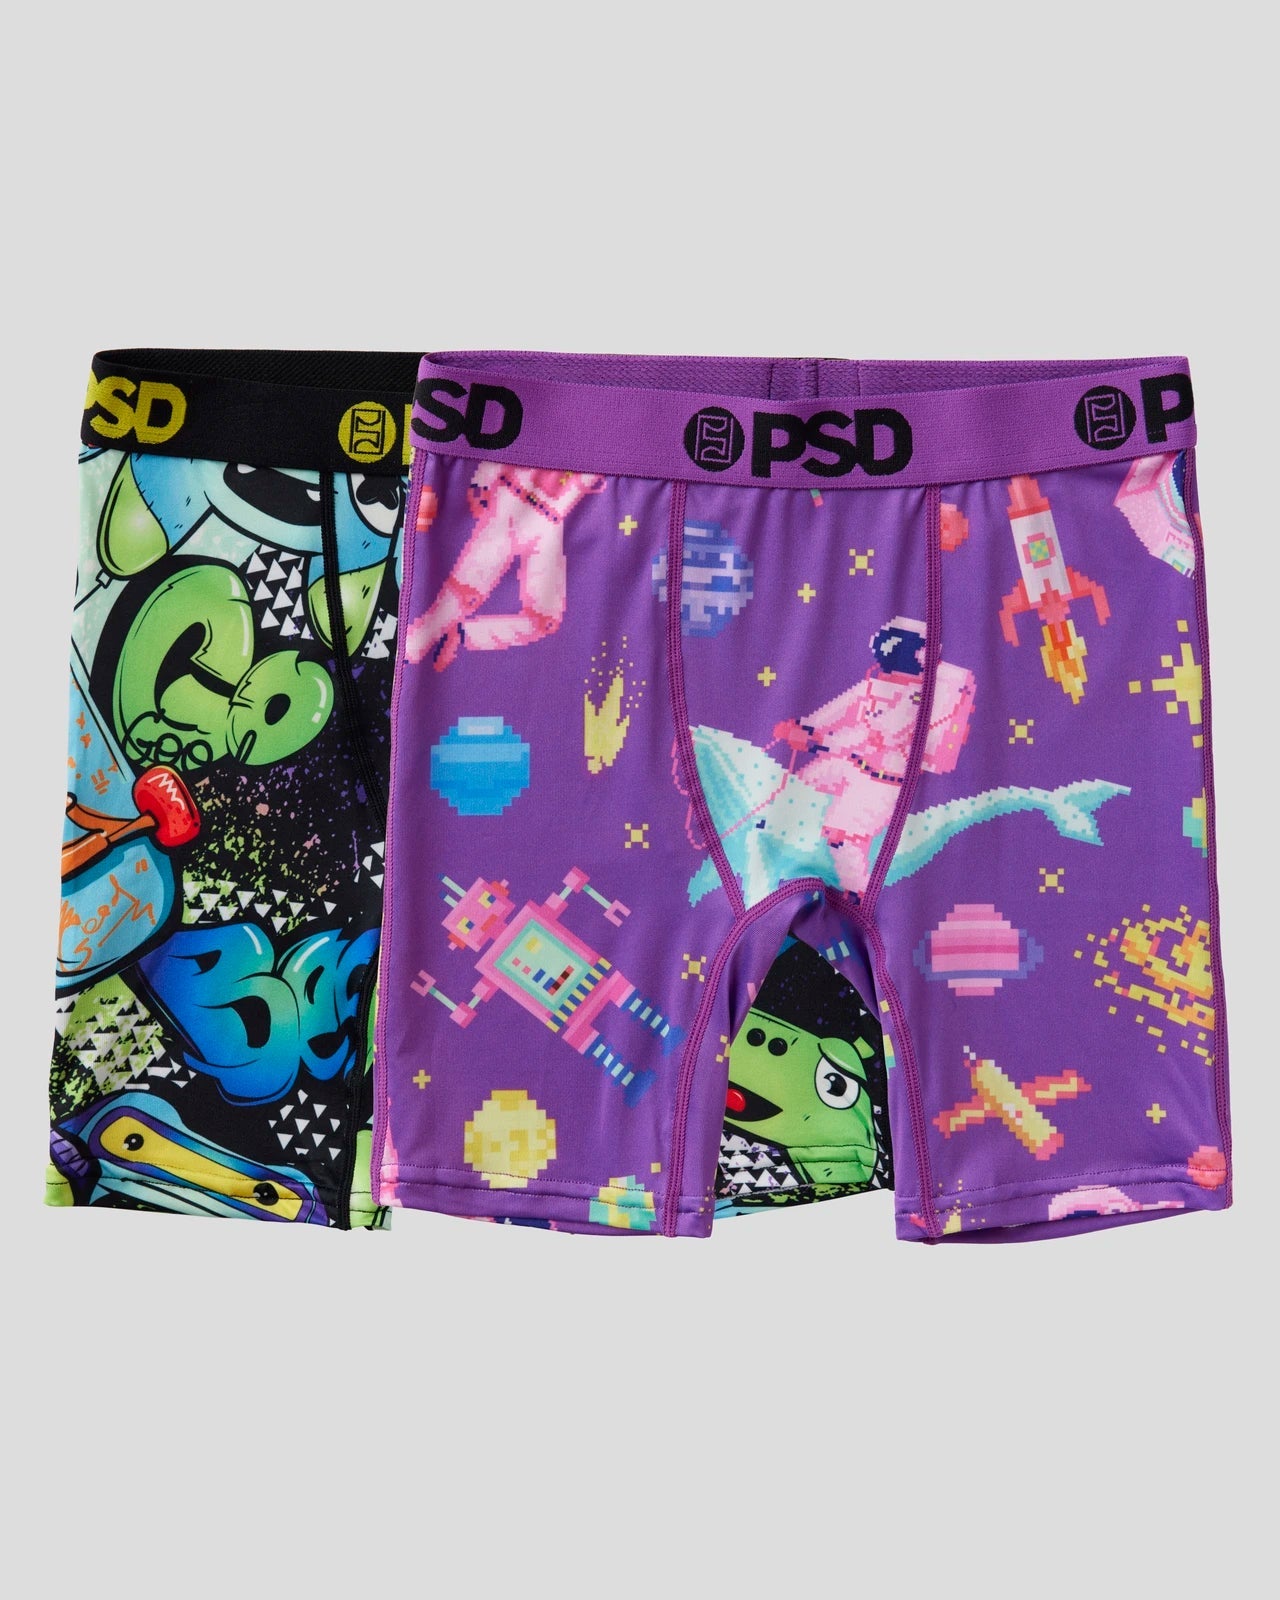 Game-On 2 Pack | Youth Underwear | PSD®